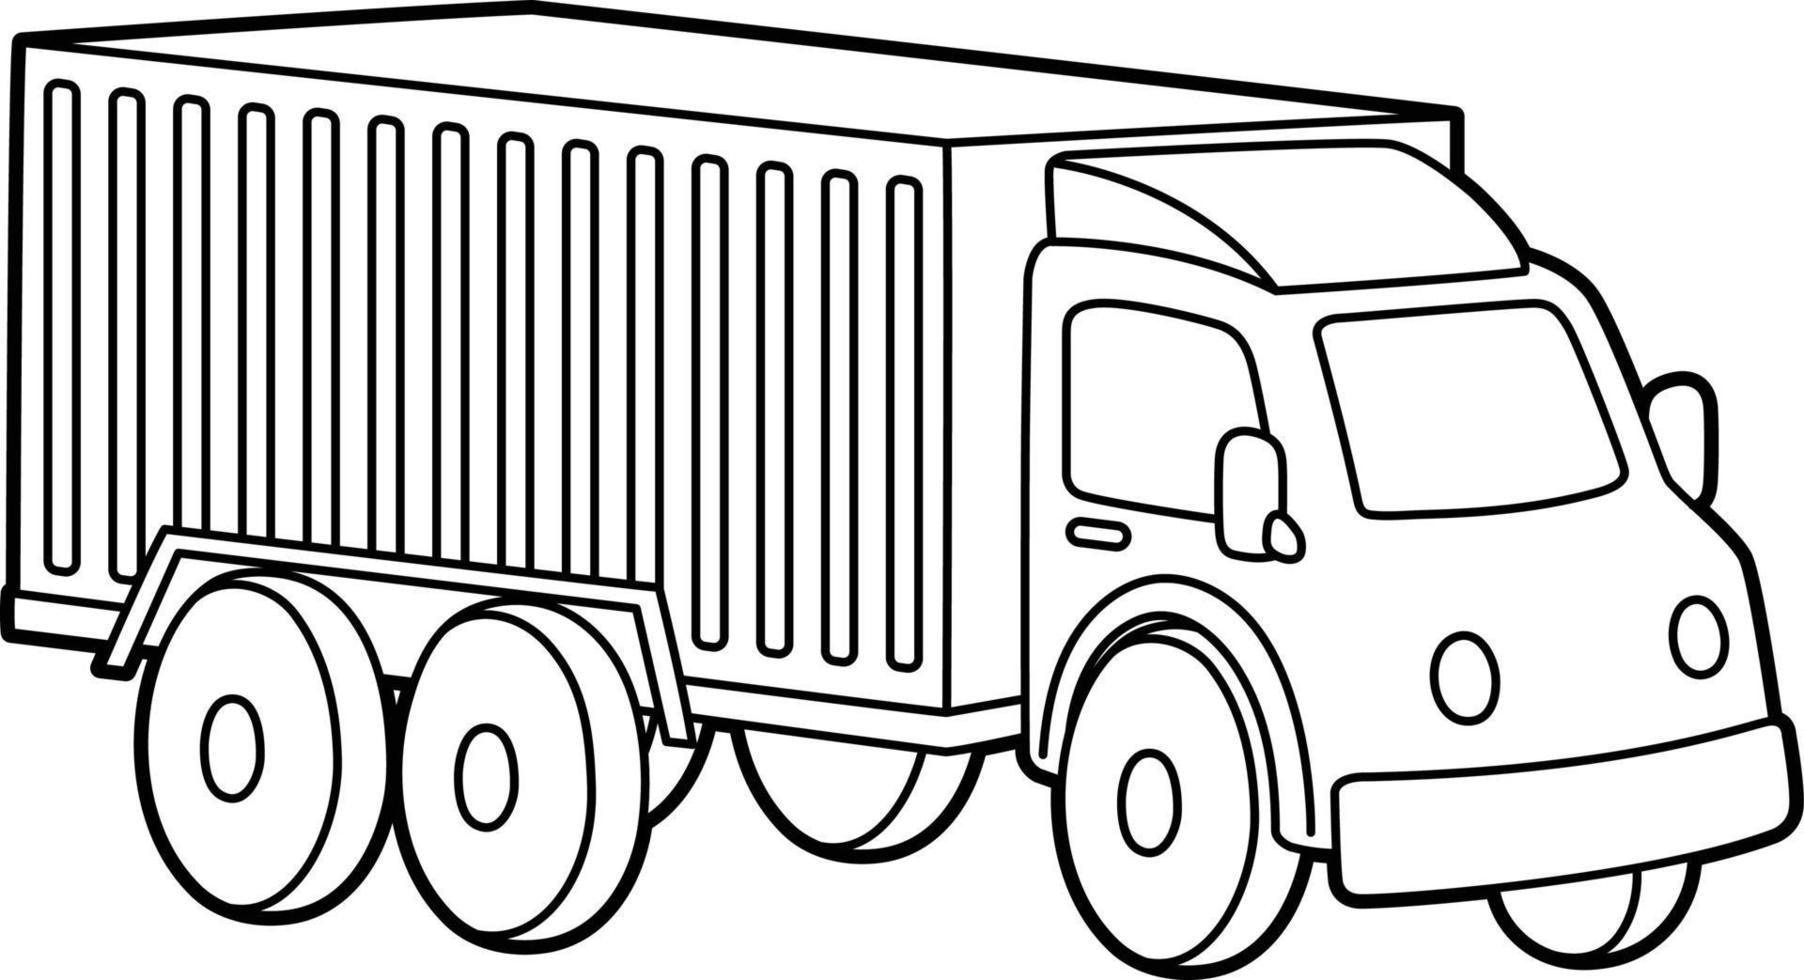 Truck Coloring Page Isolated for Kids vector